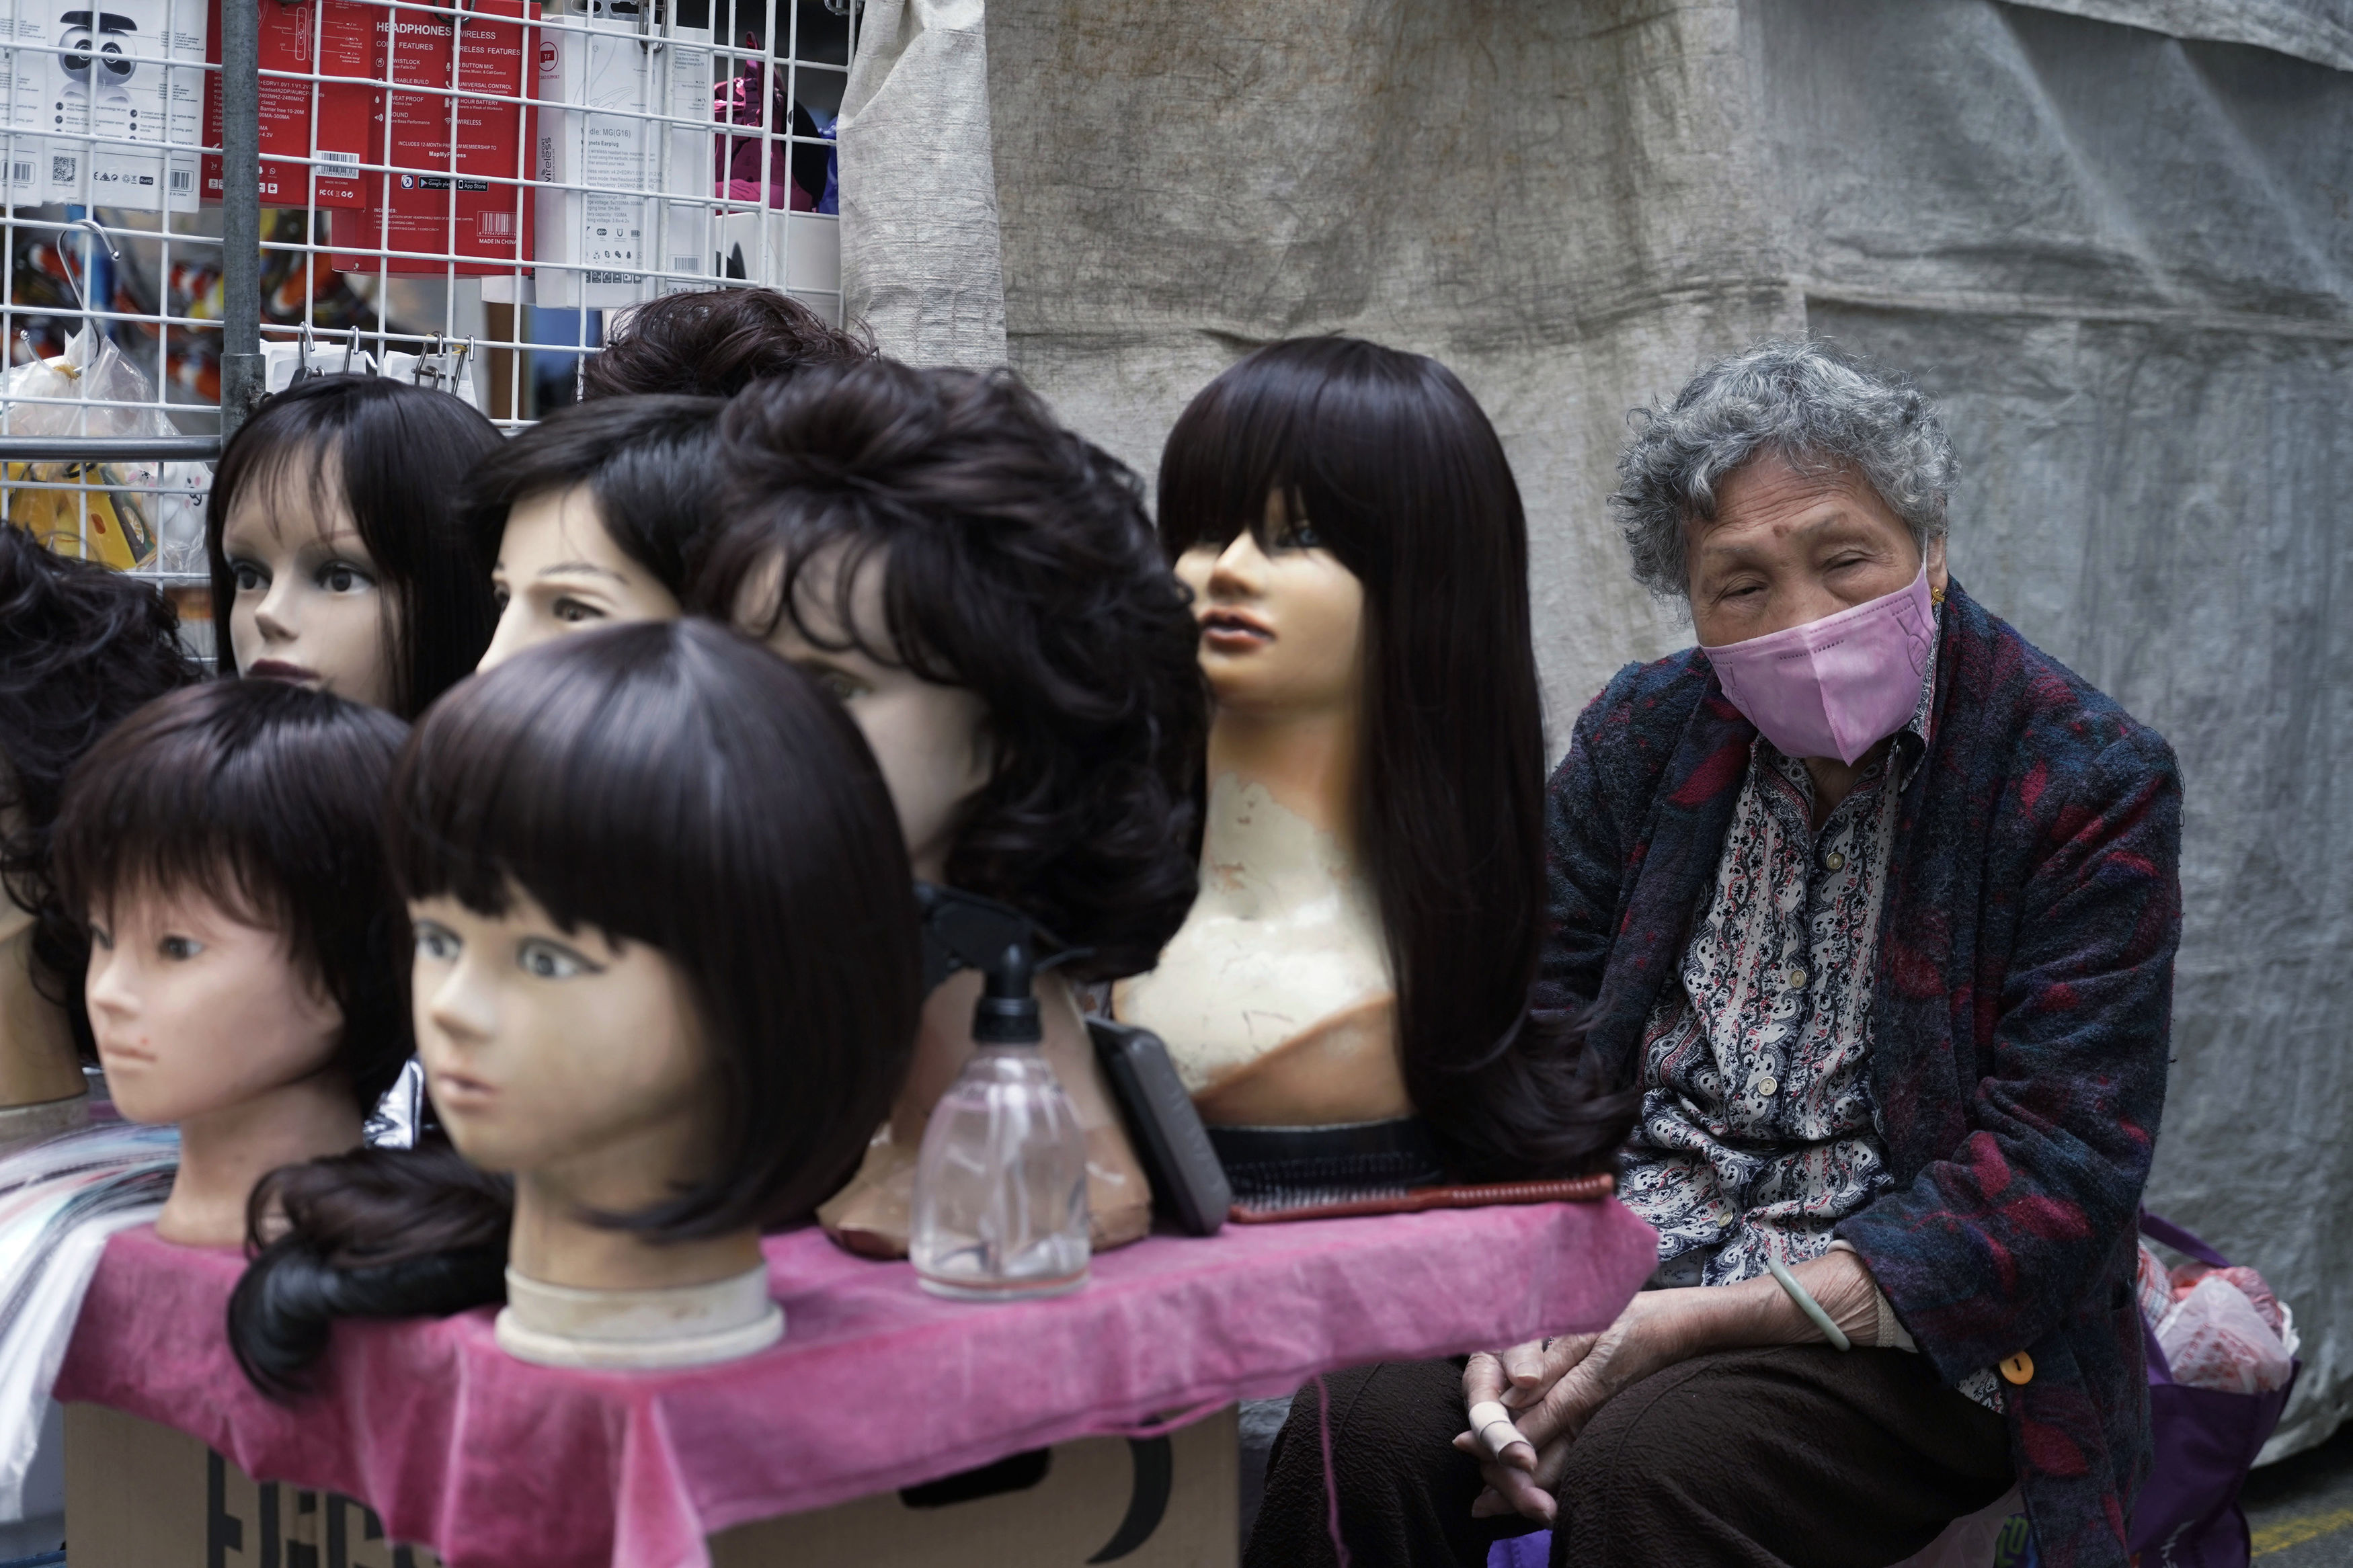 A vendor wears a face mask yesterday at her wig stall in Hong Kong which has blocked travel to China